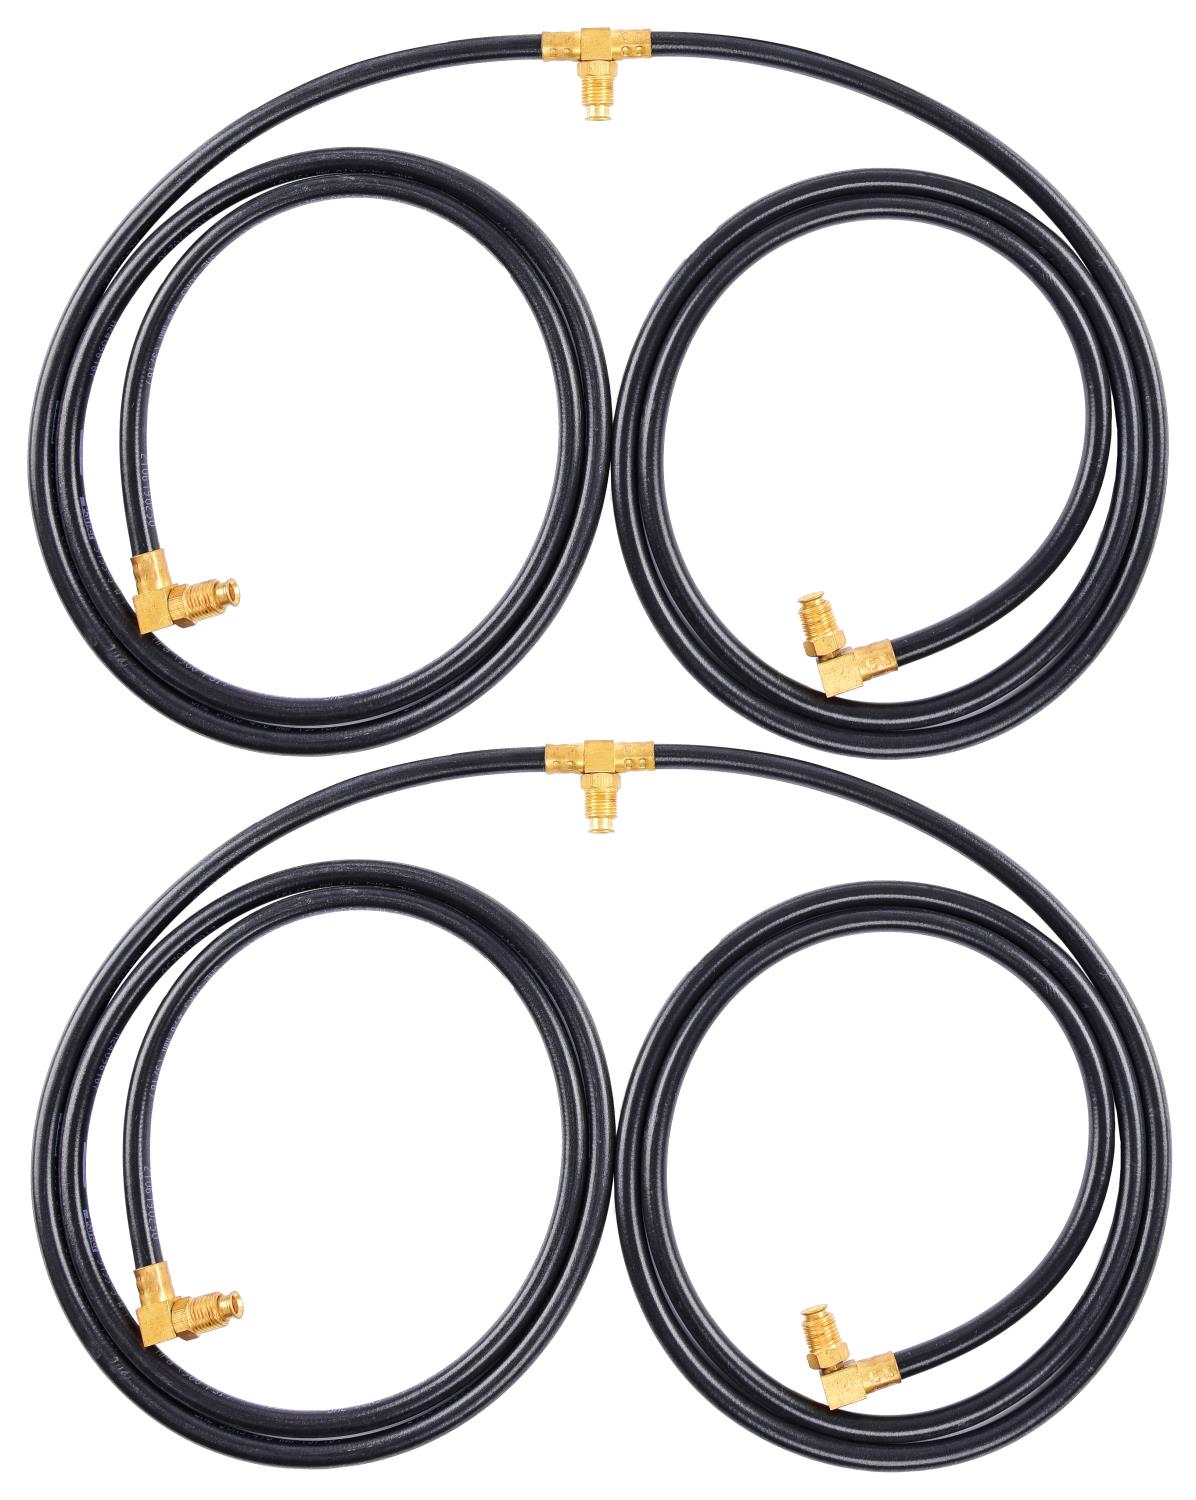 Universal Convertible Top Hose for 1947 Ford Deluxe, 1958-1963 Mopar [Black, Rubber]